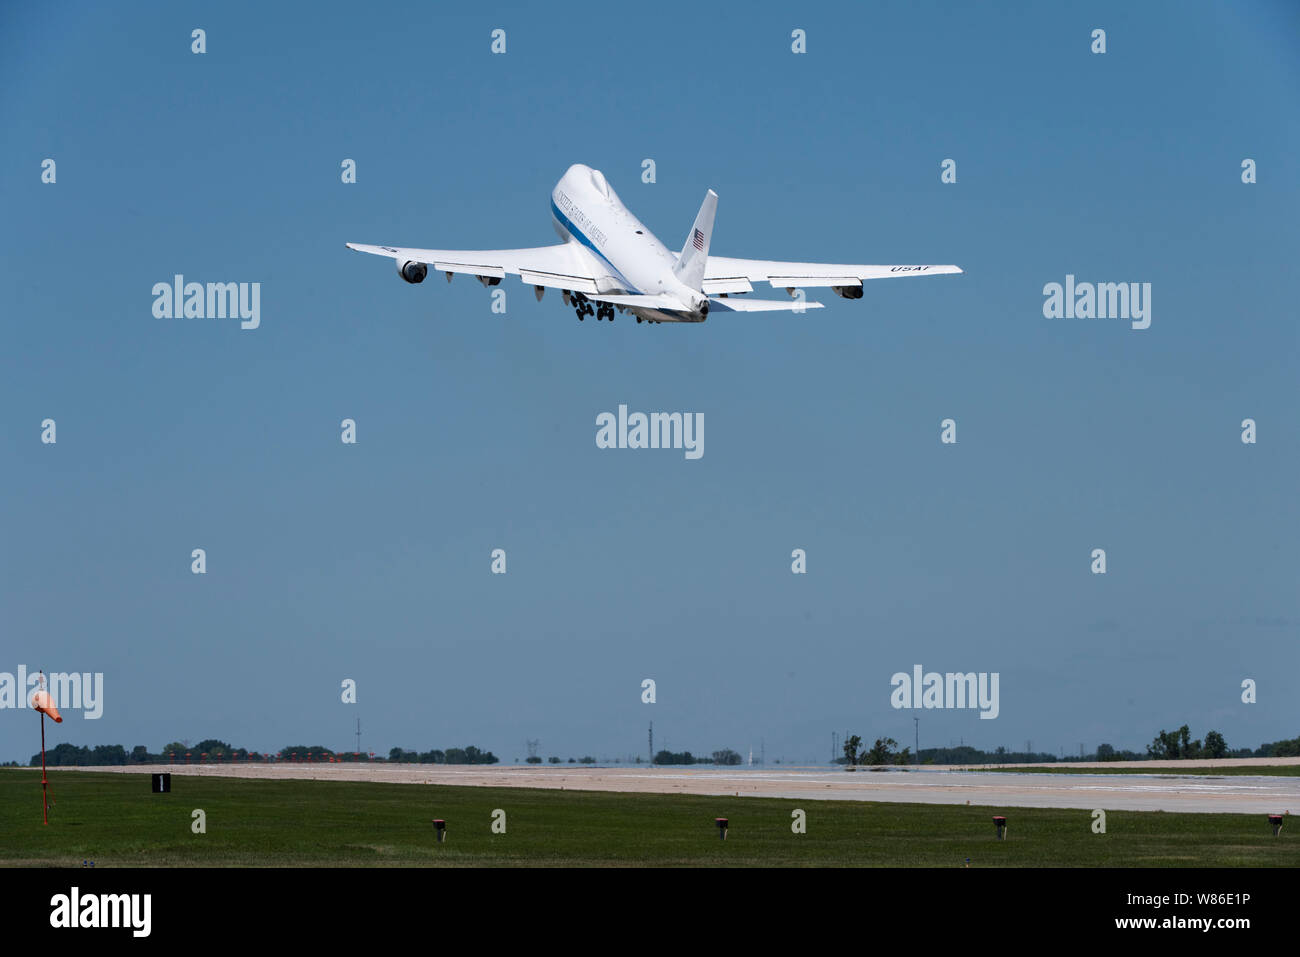 A U.S. Air Force E-4B National Airborne Operations Center aircraft takes off from Offutt Air Force Base, Nebraska, July 10, 2019. The E-4B is protected against the effects of an electromagnetic pulse and has an electrical system designed to support advanced electronics and a wide variety of communications equipment.(U.S. Air Force photo by Staff Sgt. Jacob Skovo) Stock Photo